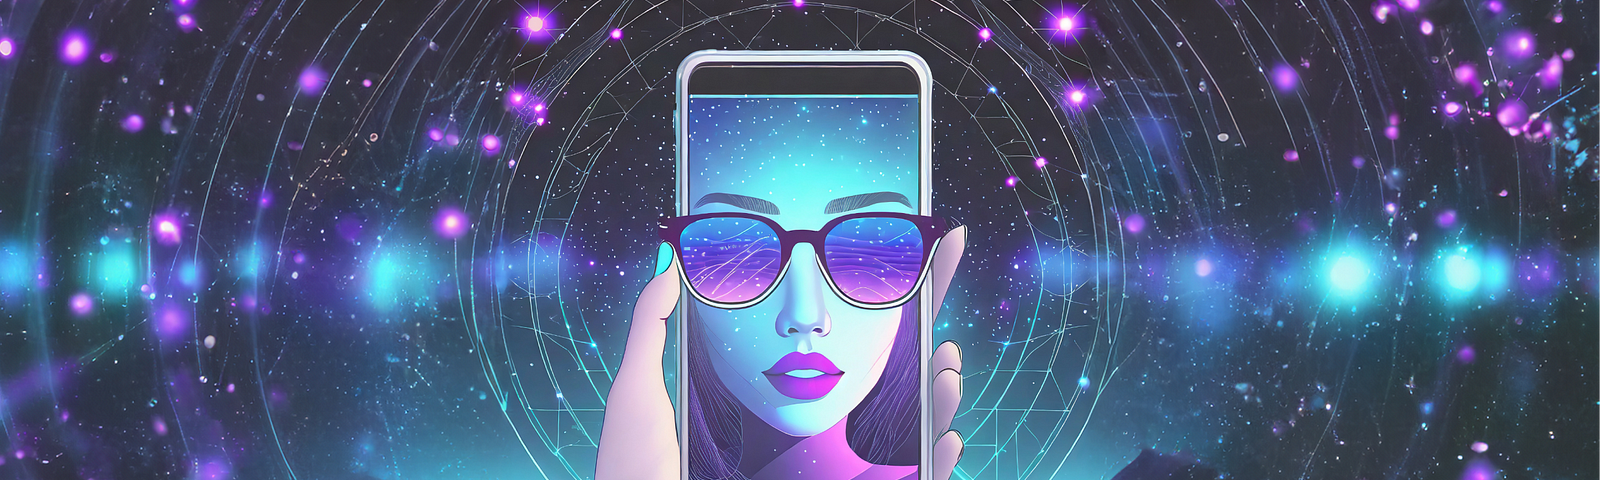 In a captivating image blending the cosmos and earthly beauty, a hand emerges against a starlit sky, holding an iPhone. On its screen, a girl virtually tries on stylish glasses, symbolizing the seamless integration of VTO technology with social media, as explored in our insightful article on designhubz.com.